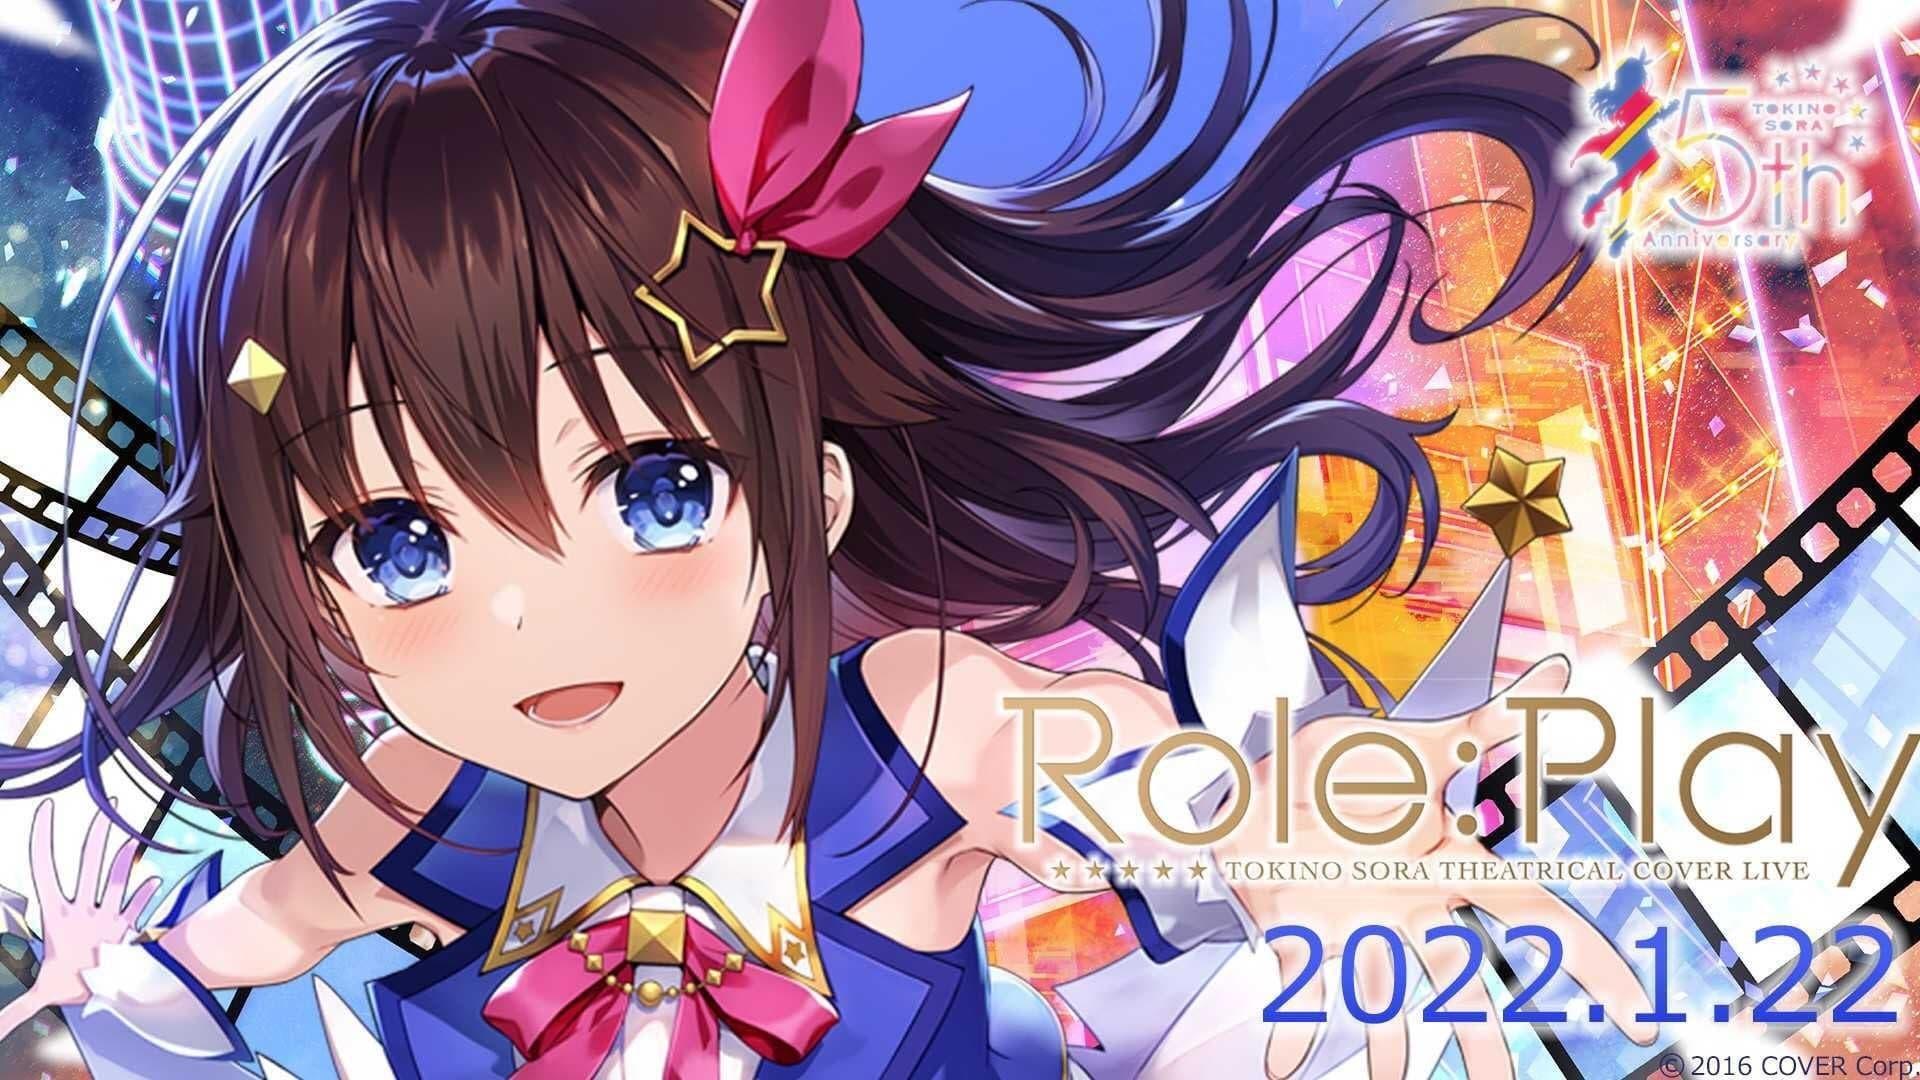 Tokino Sora Theatrical Cover Live "Role:Play" backdrop